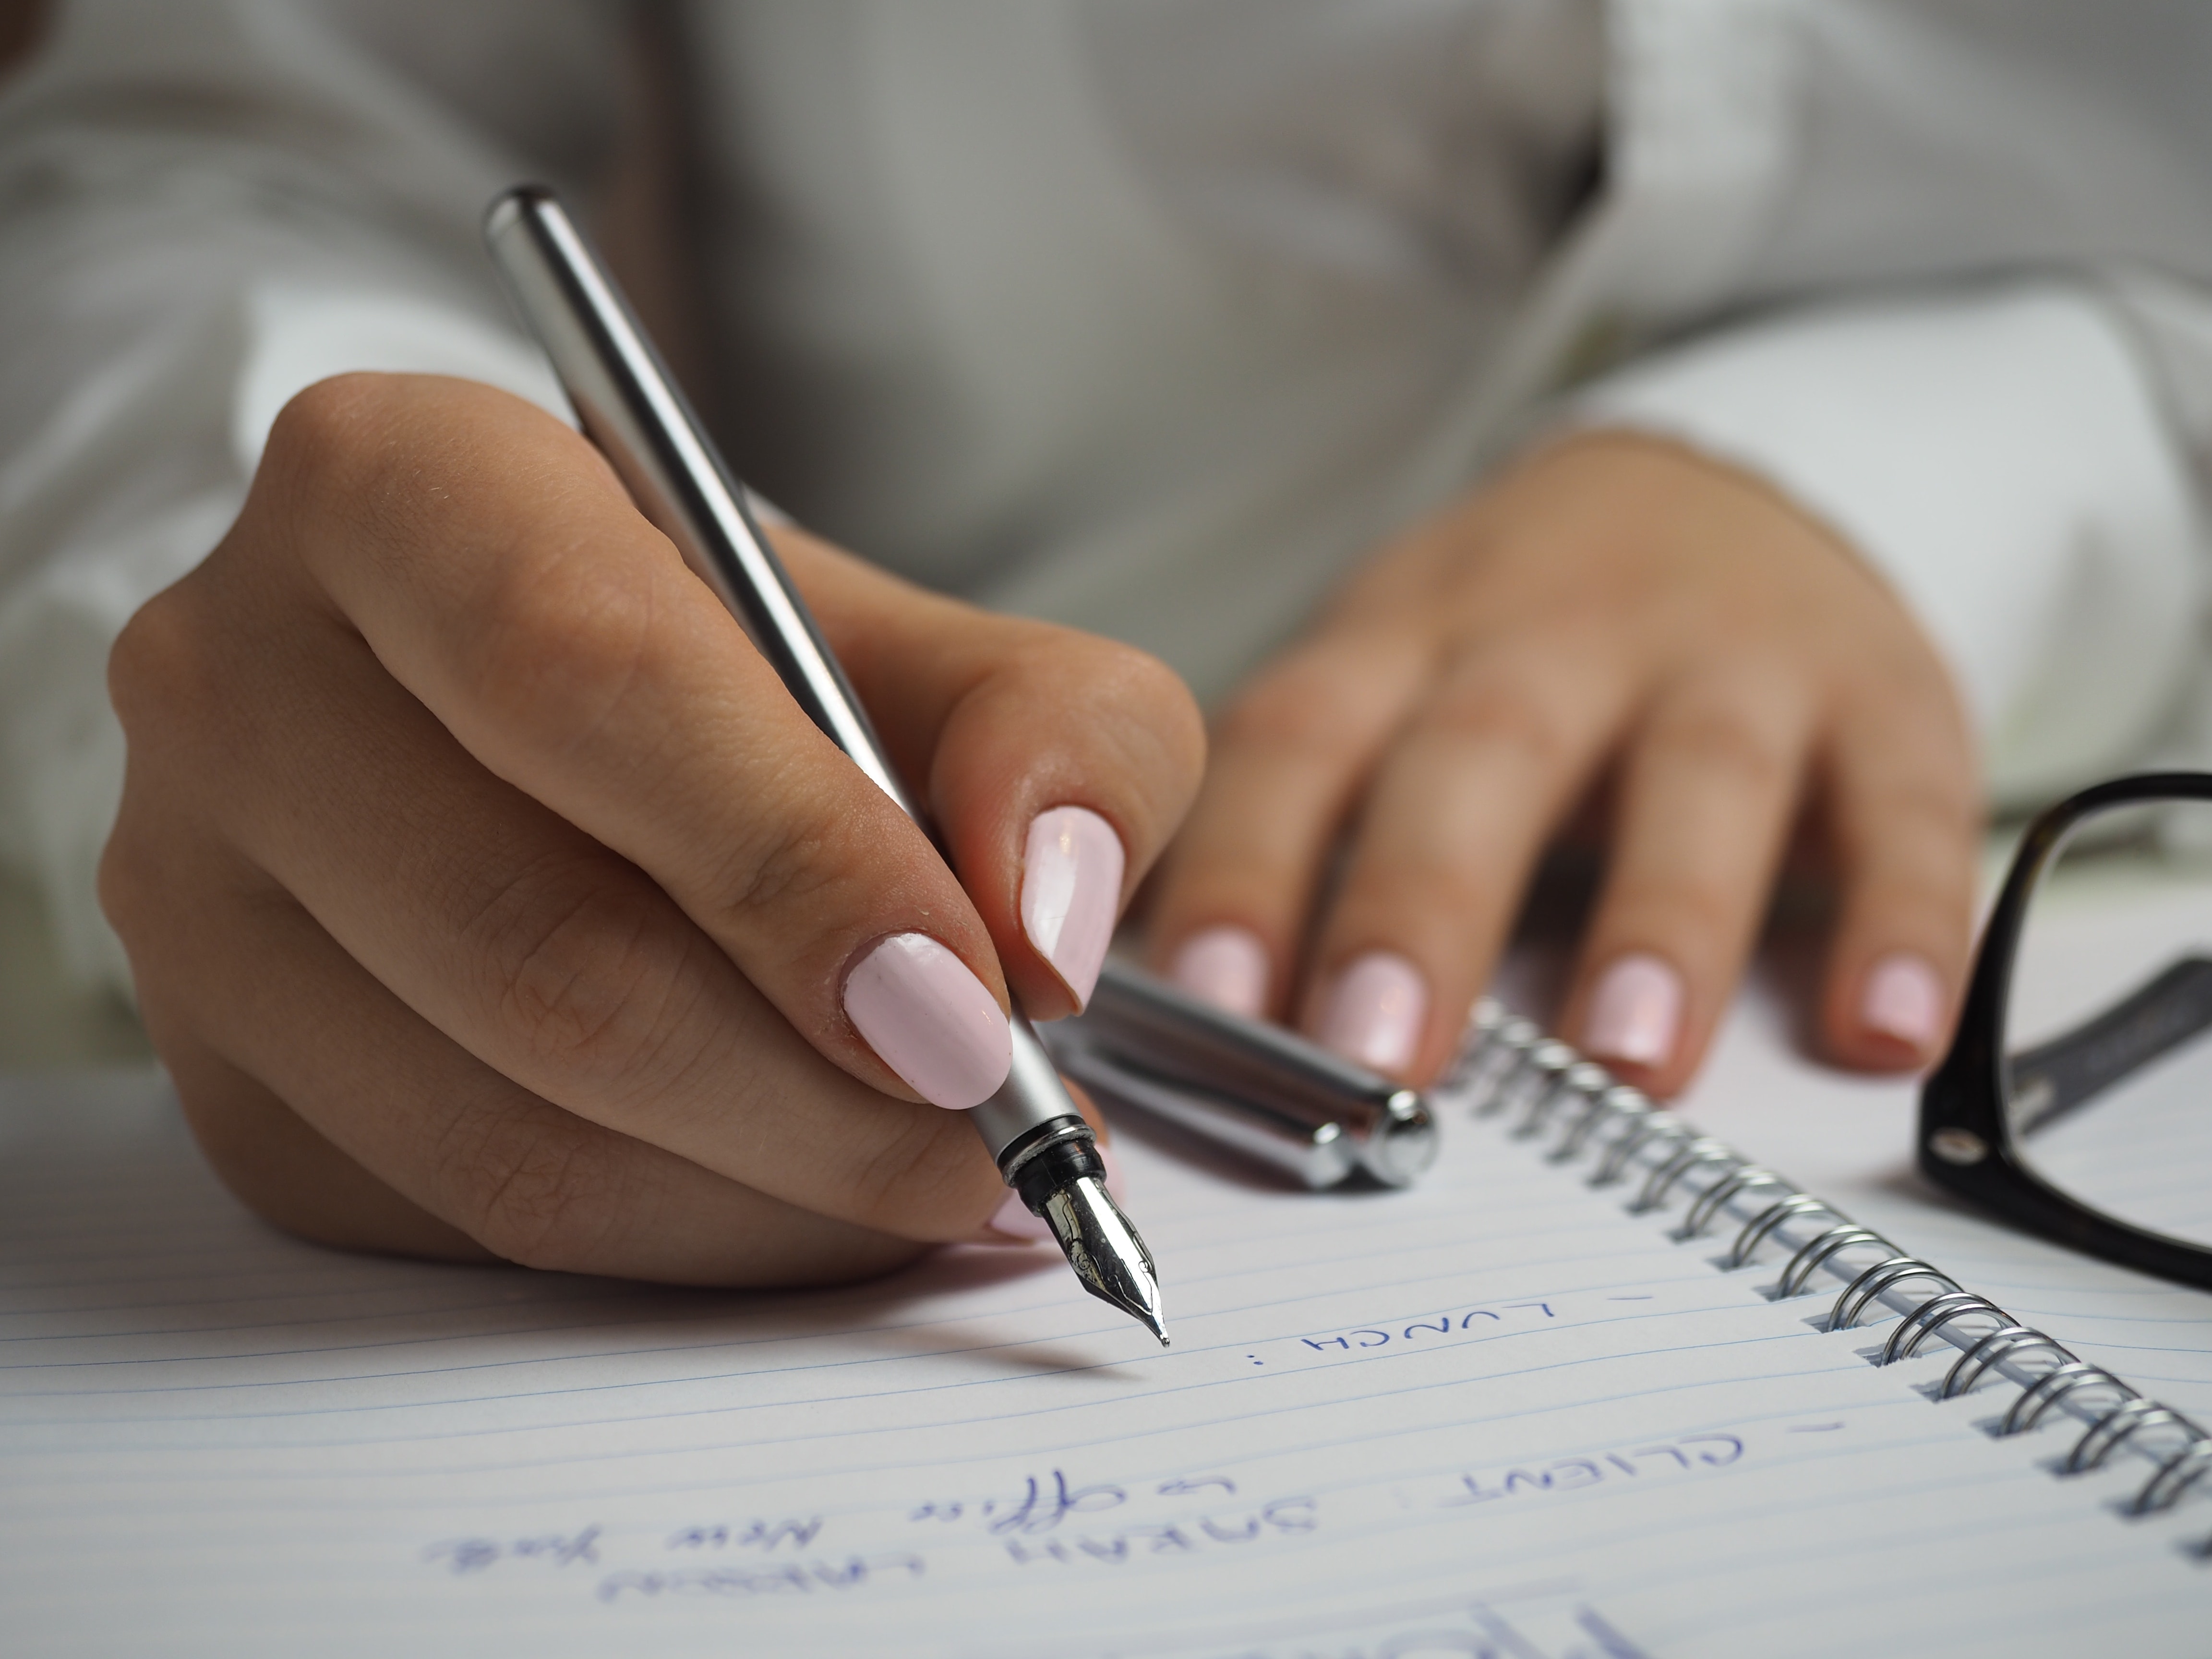 Woman in white long sleeved shirt holding a pen writing on a paper photo